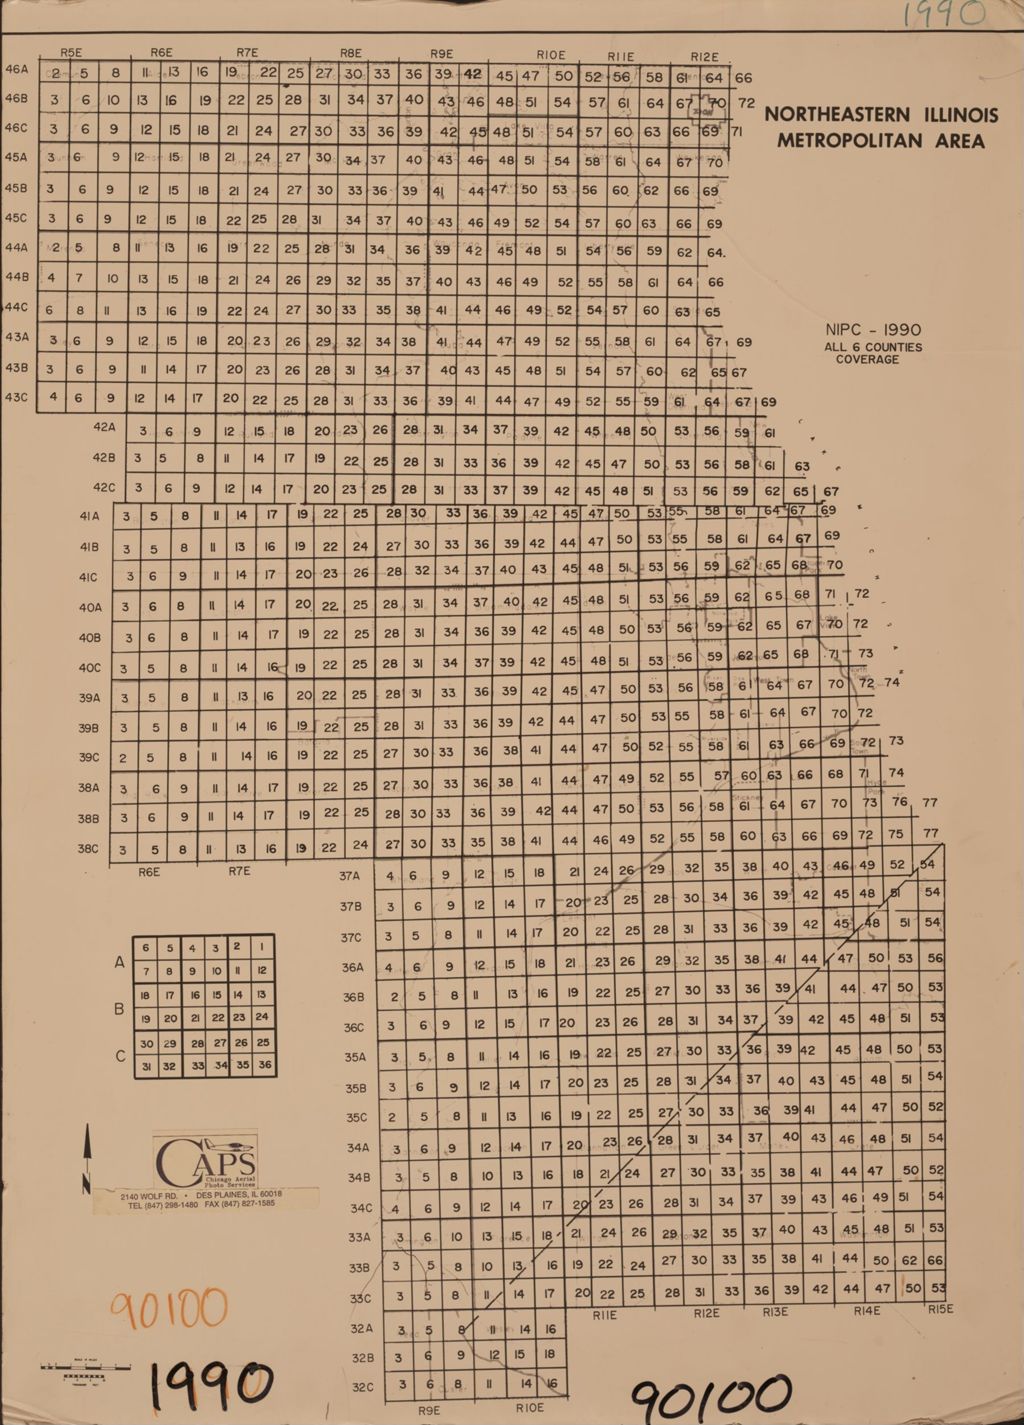 Miniature of Aerial survey index map for 1990 Northeastern Illinois Planning Commission Aerial Survey (90100)